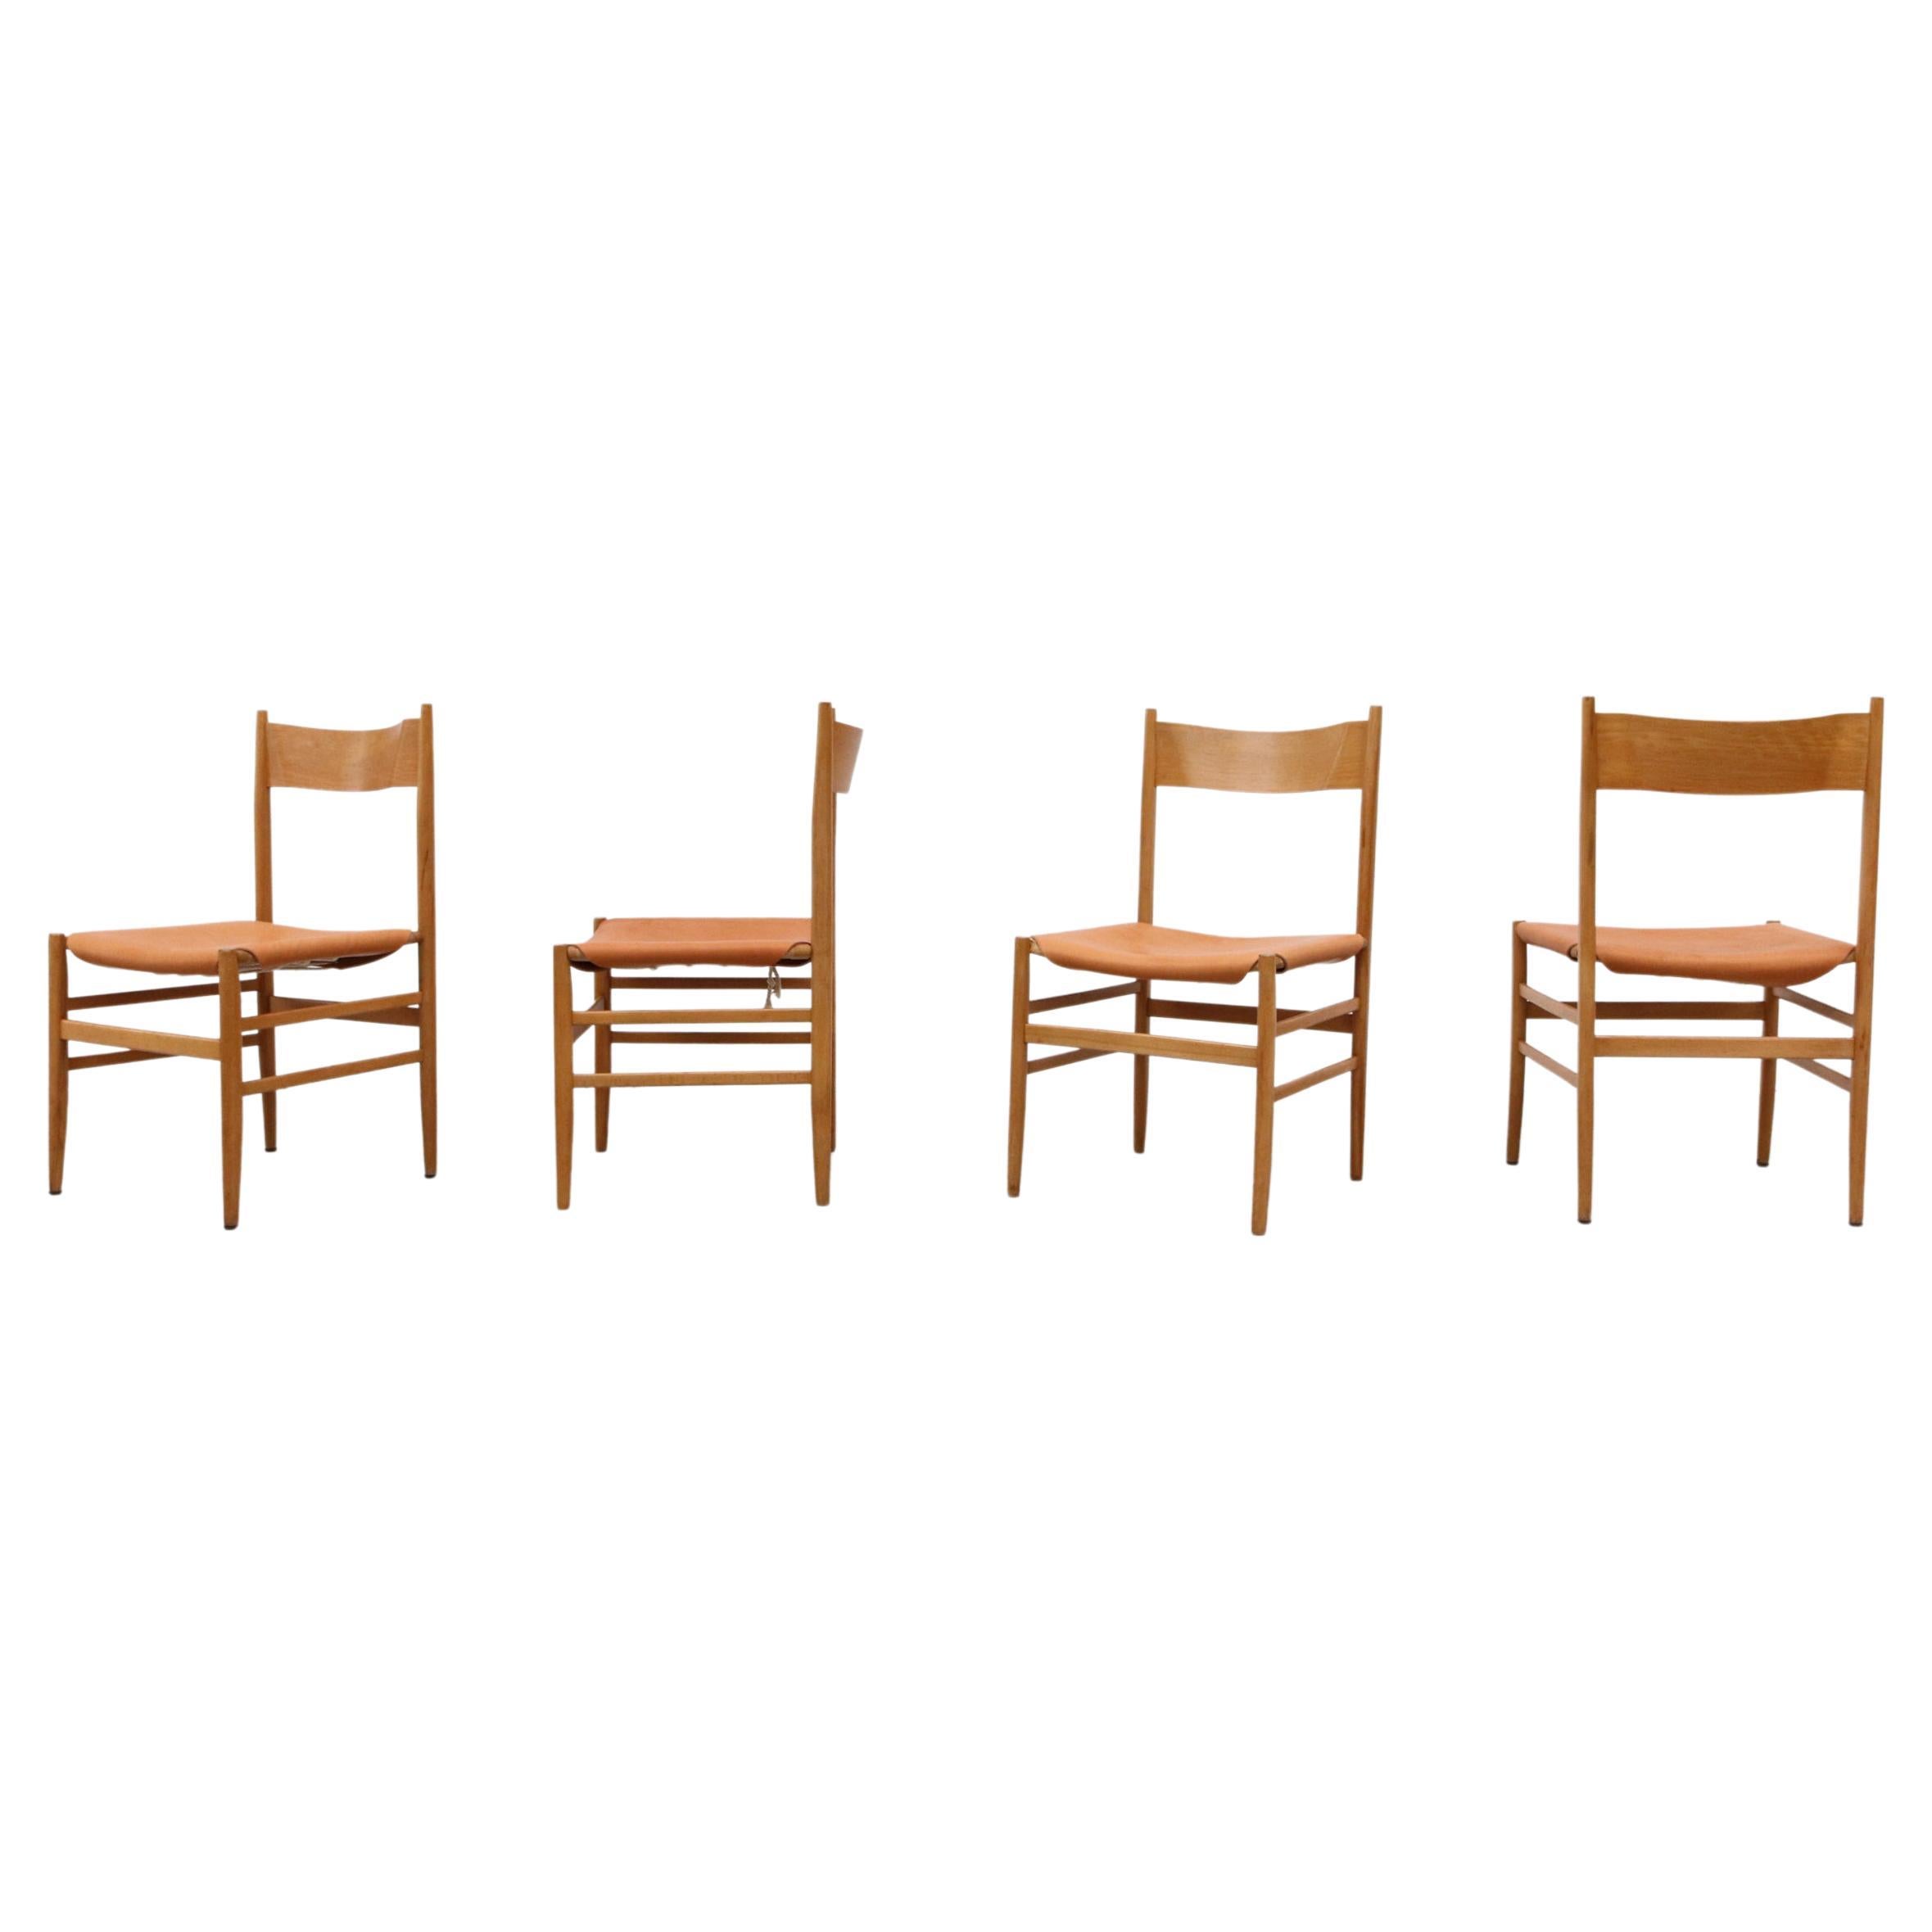 Hans Wegner Style Danish Blonde Dining Chairs with Leather Seats